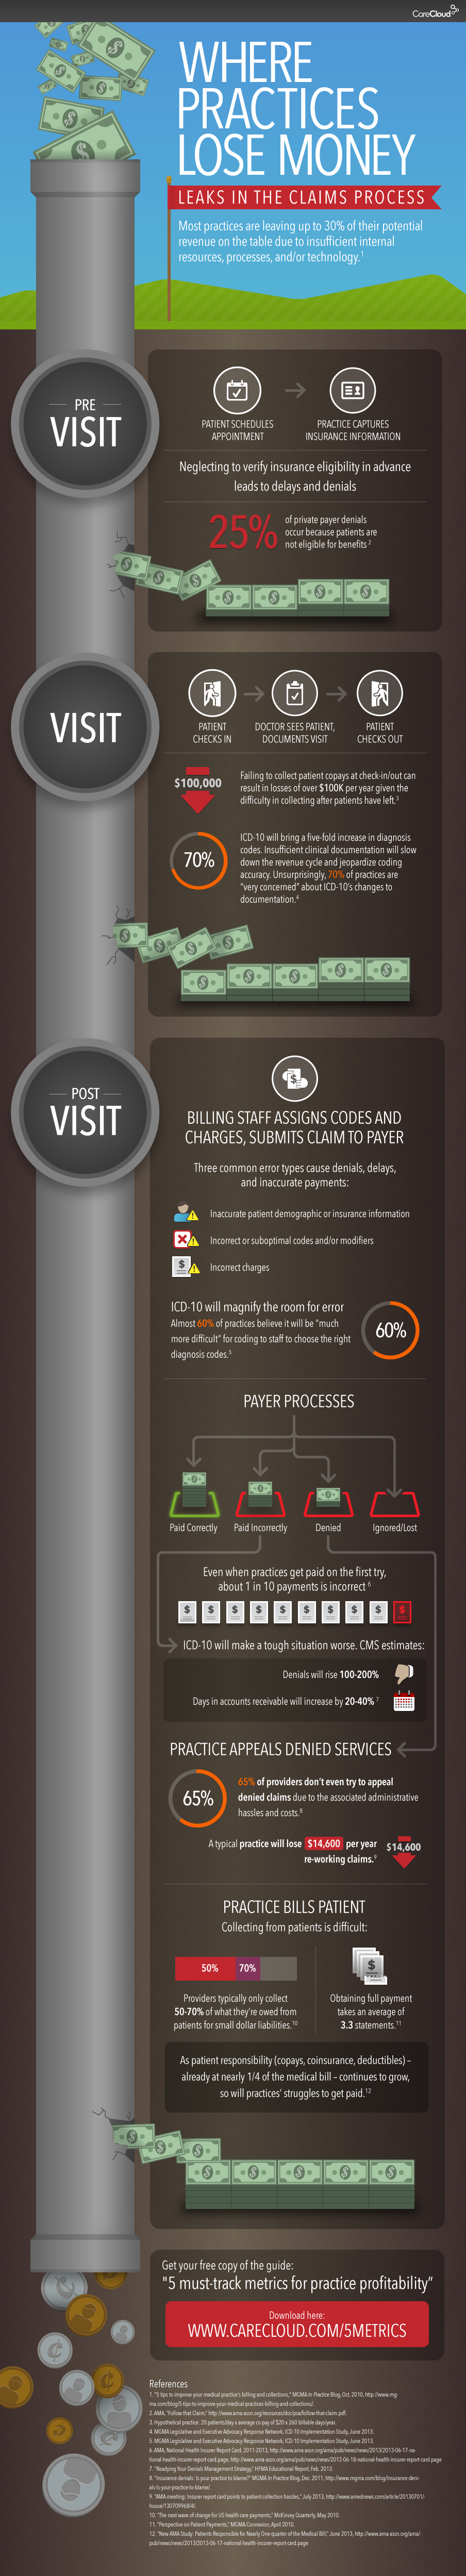 infographic-leaks-claims-process